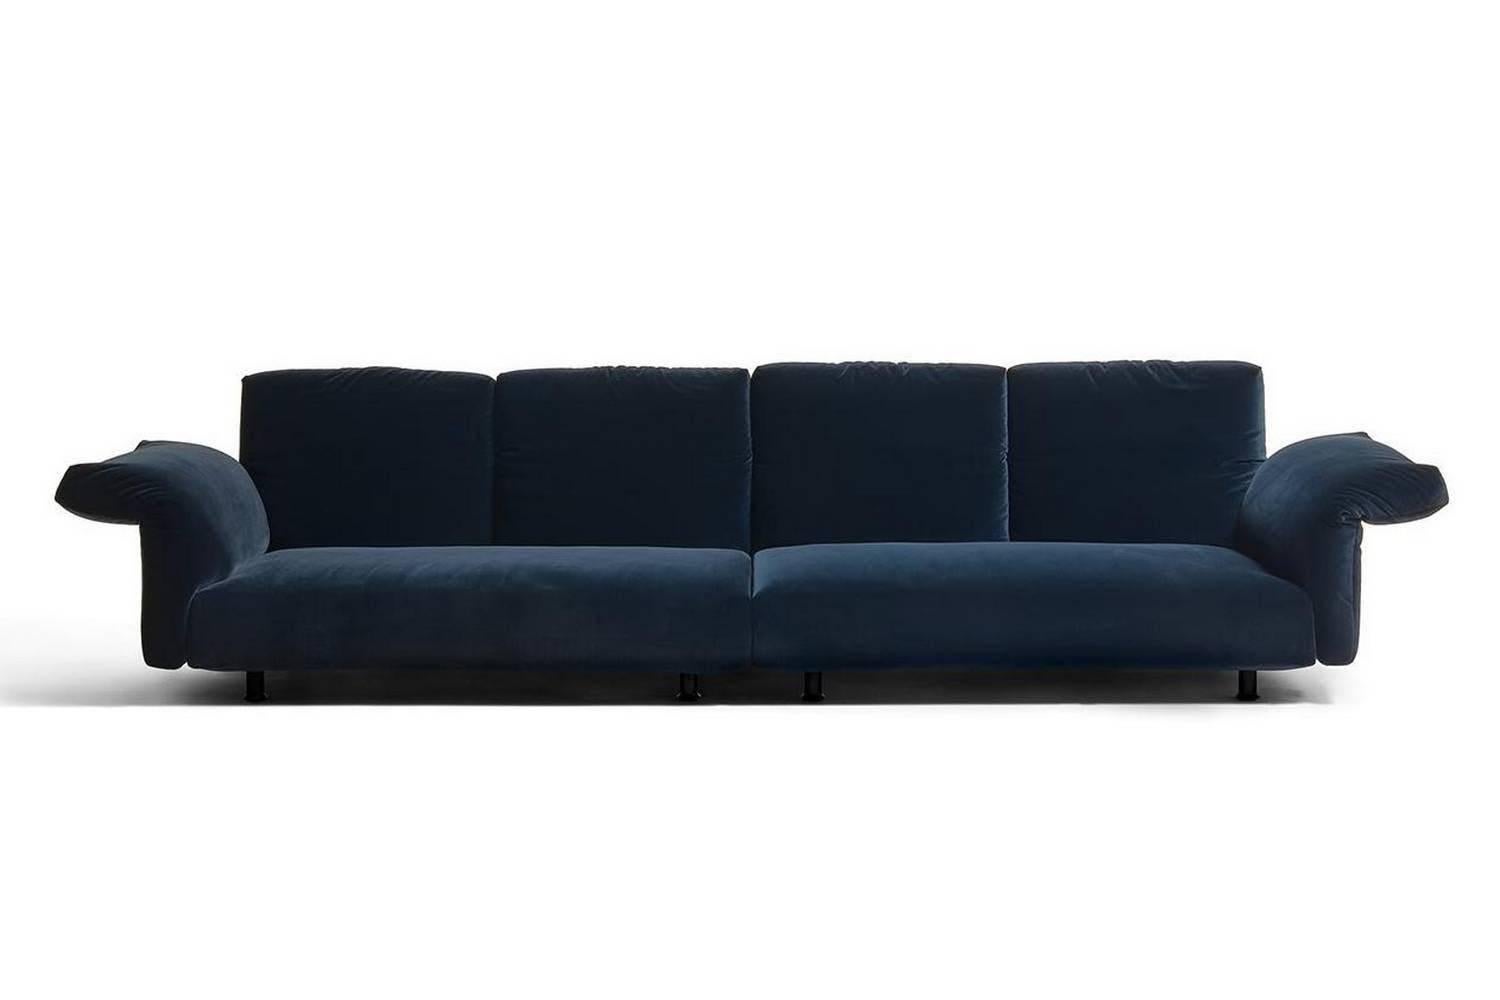 It is a primary sofa, contained in its dimensions. Elegant. "Flexible," thanks to the "smart" pillow. Adaptable, because it consists of several elements. Welcoming, to stimulate the encounter between people.

  